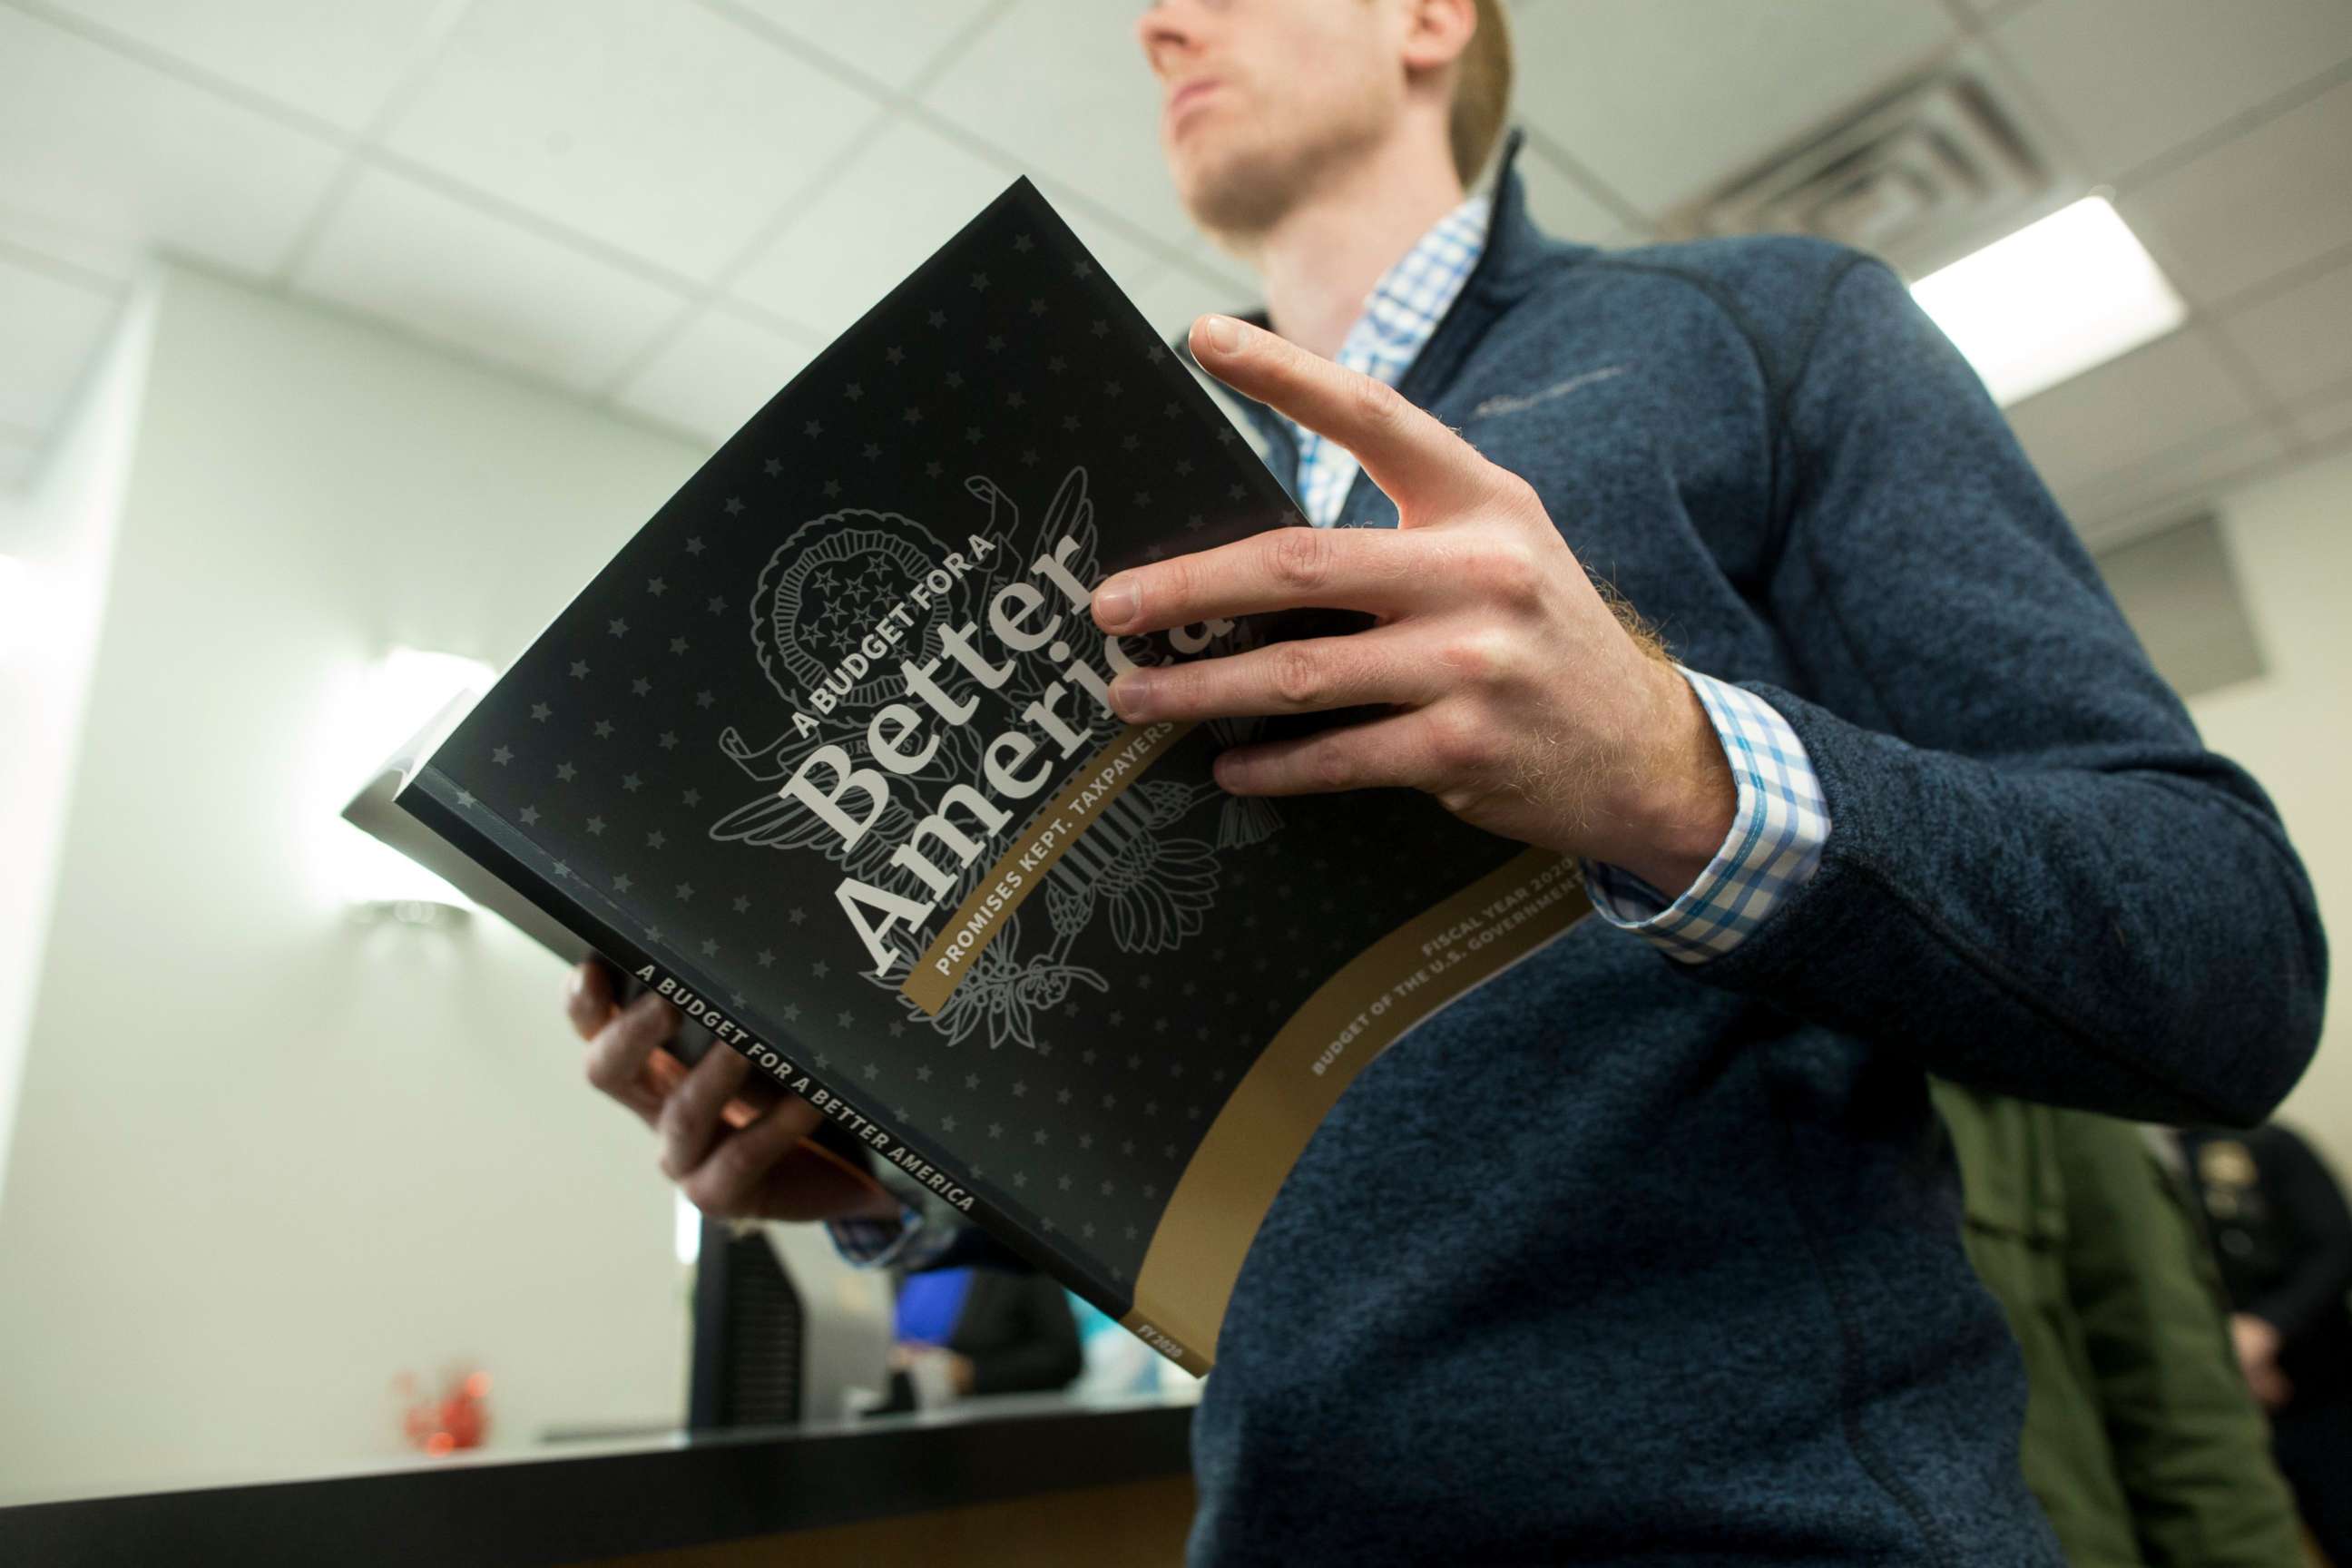 PHOTO: A member of the public waits in line to purchase a copy of President Donald Trump's budget for the fiscal year 2020, at it's release at the Government Publishing Office bookstore in Washington, March 11, 2019.